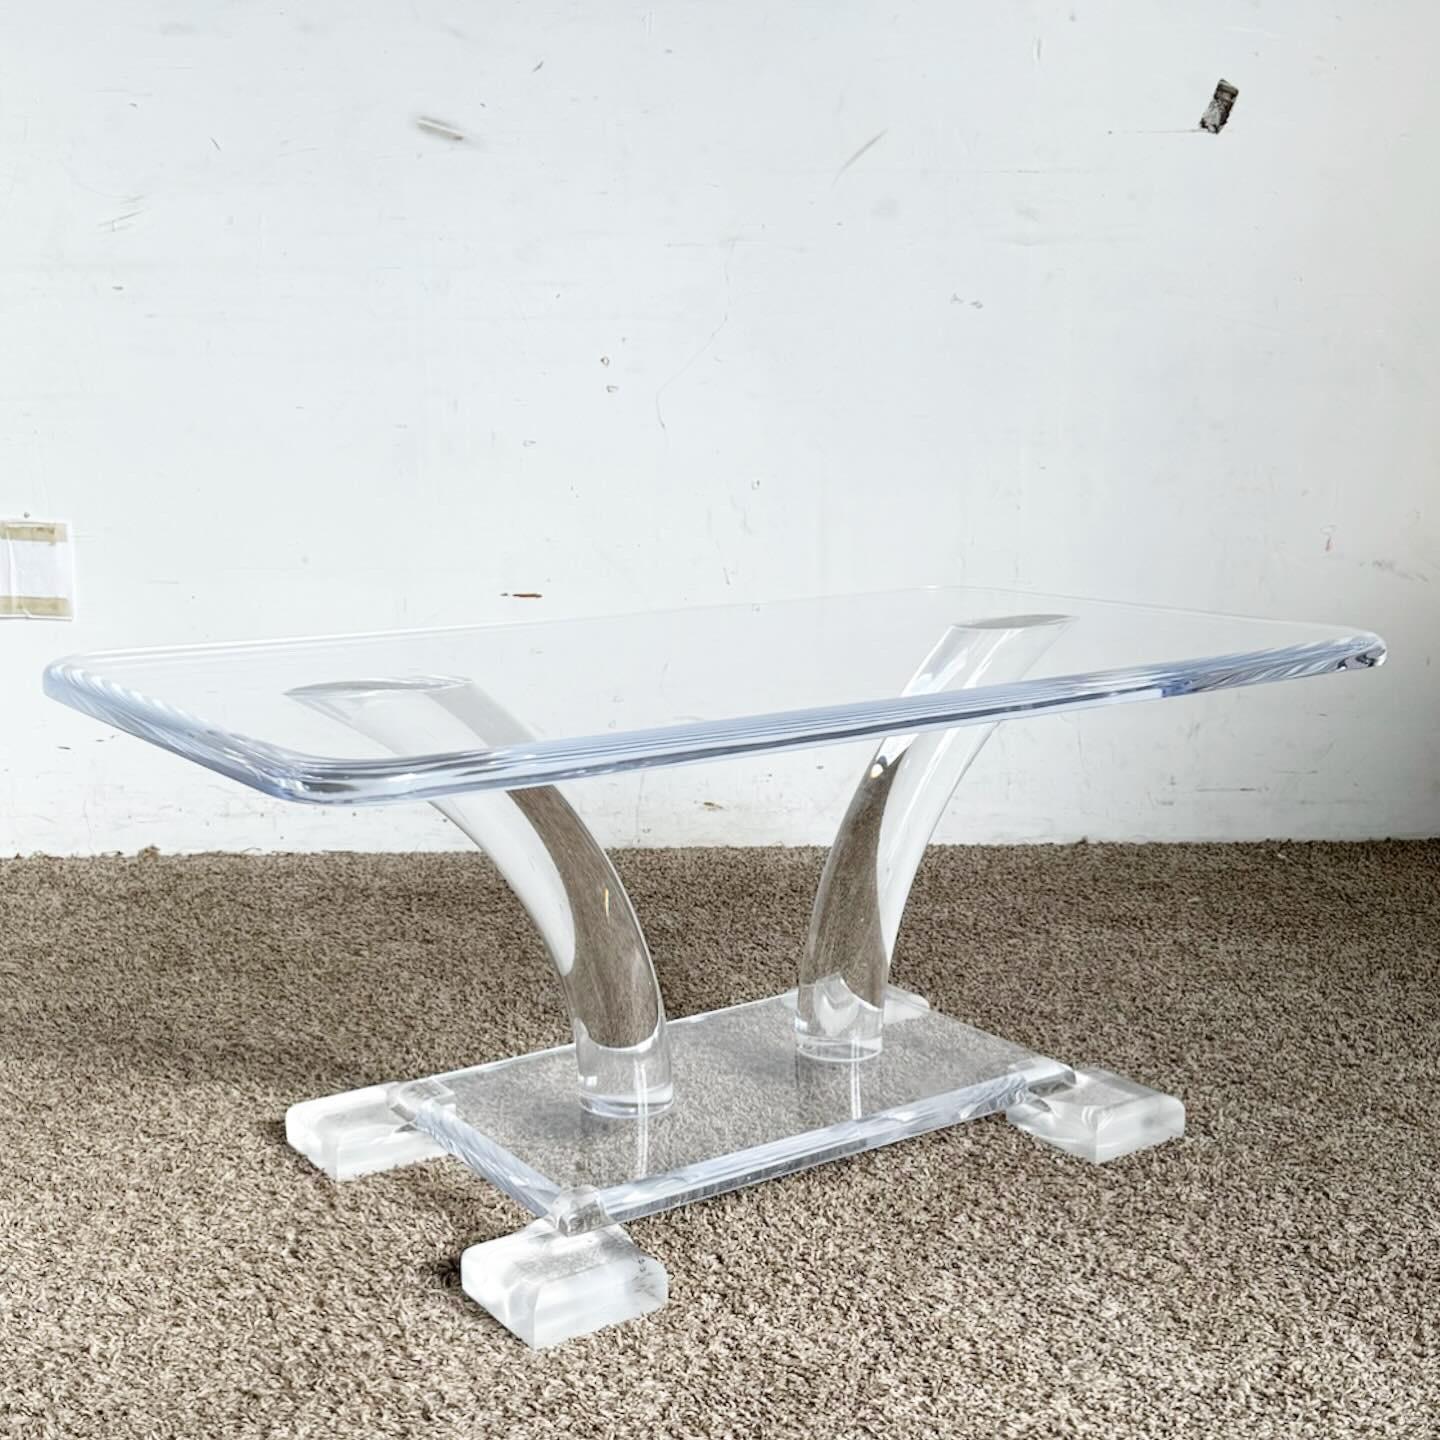 The Mid Century Modern Chunky Lucite Coffee Table adds a retro yet futuristic touch to any interior. Made entirely of lucite, it features a bold, minimalist design. Its transparency creates a light, floating appearance, making it versatile for